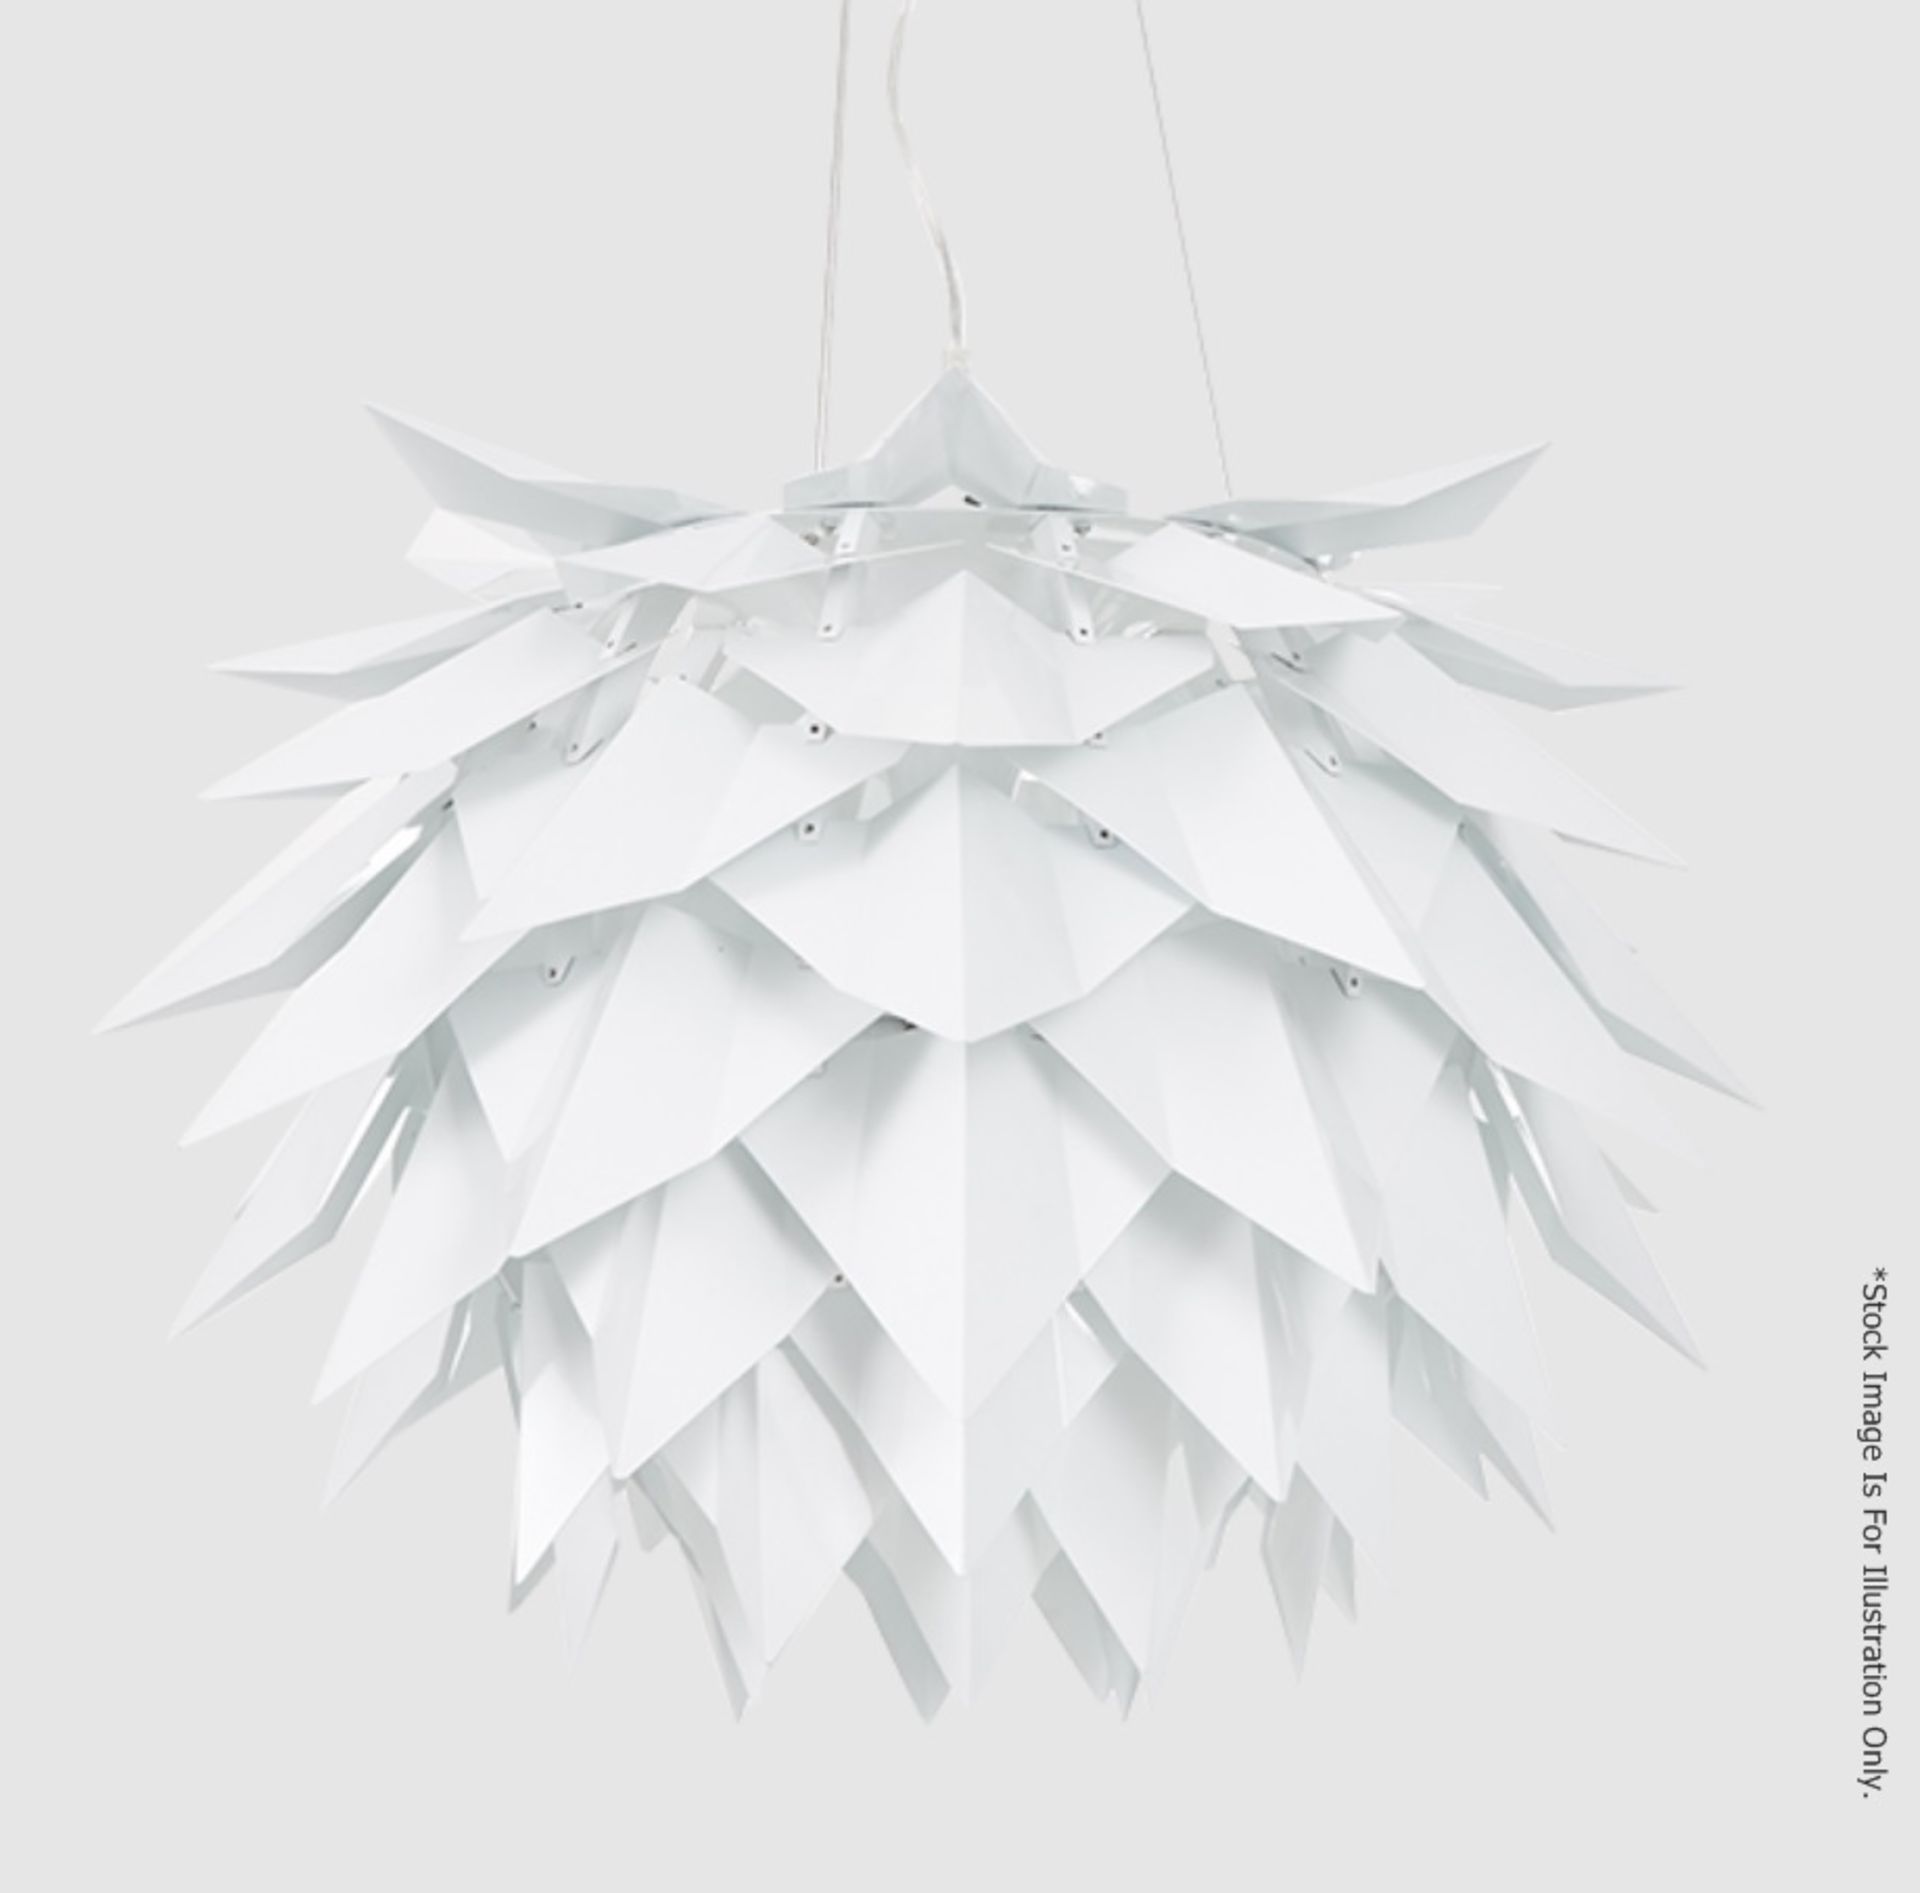 1 x 'Comosus' Statement Ceiling Pendant Light In Aluminium With A Brushed Silver Finish - New